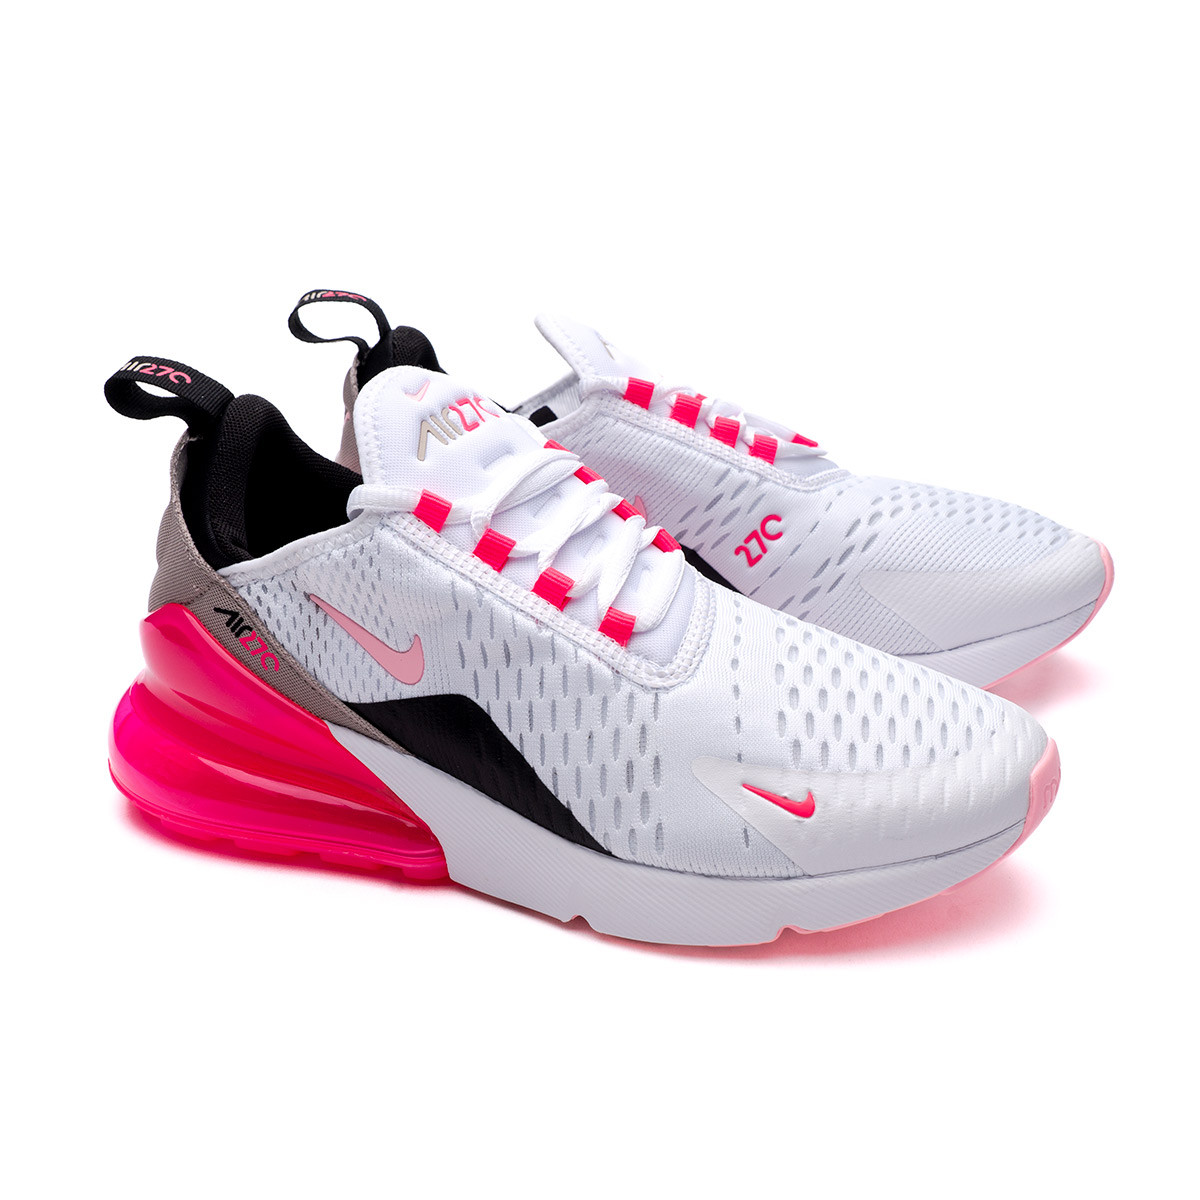 Zapatilla Nike Air Max 270 Mujer White-Arctic Punch-Hyper Pink-Black - Fútbol